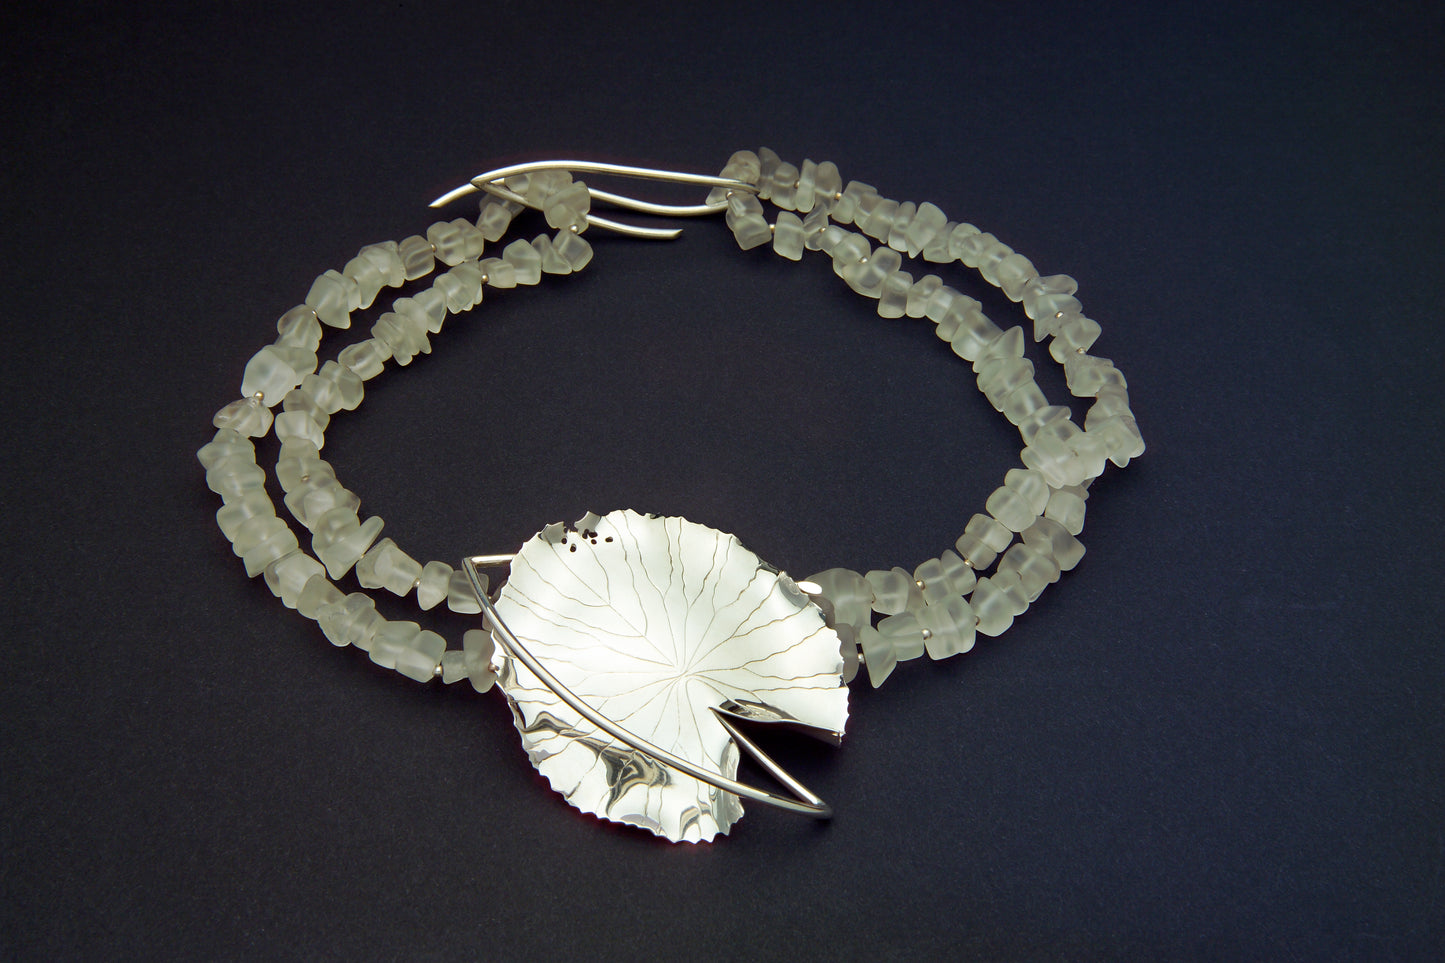 Water Lily on Quartz Crystal necklace